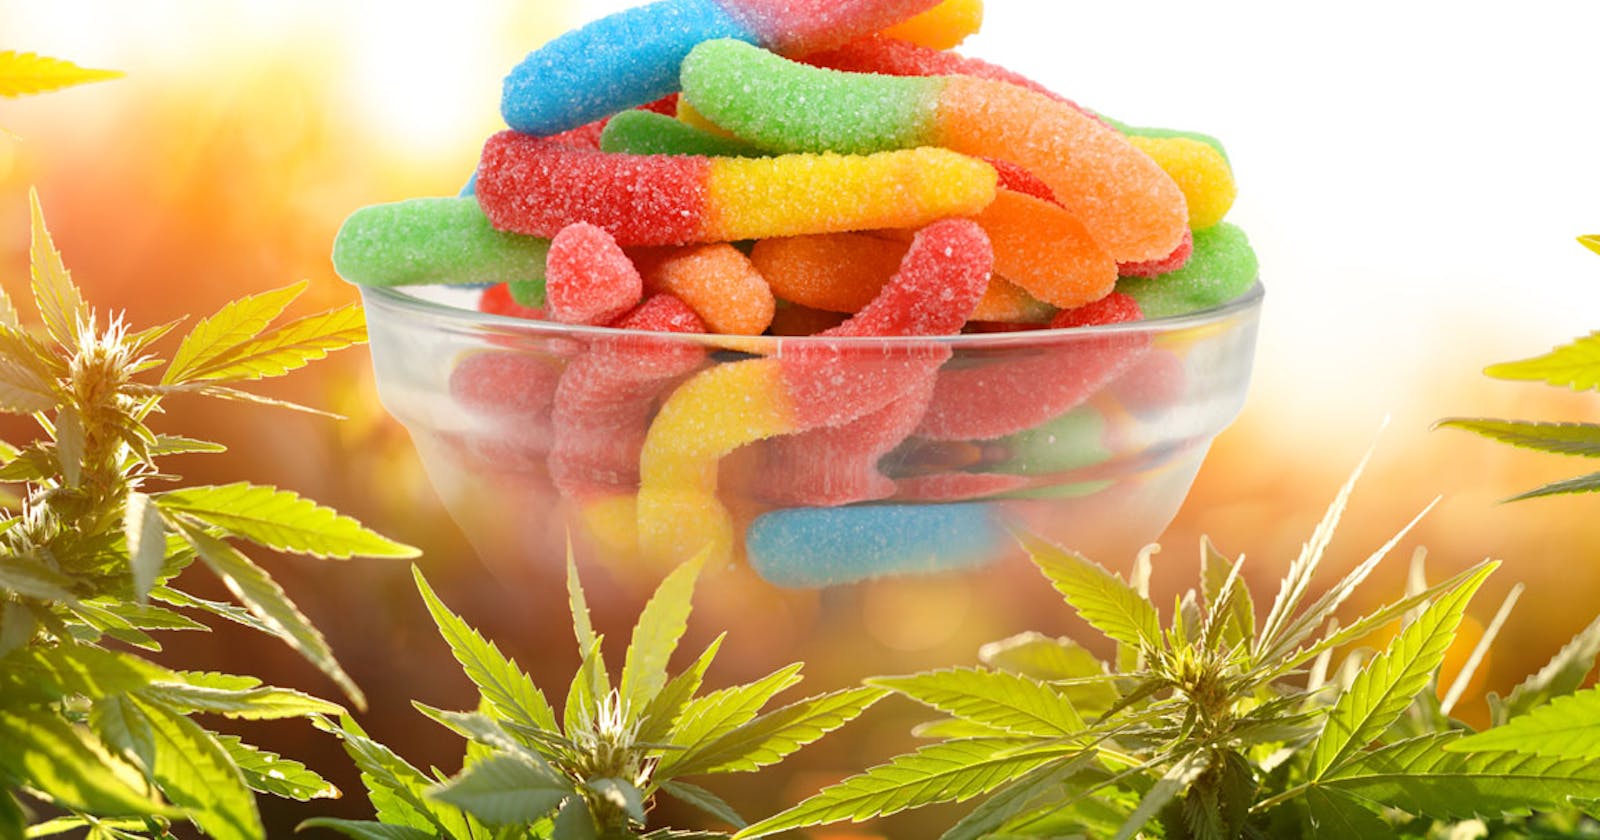 Zerenity CBD Gummies Canada Shocking Reviews: Cost Revealed, Must Check Scam Before Buying Is It Worth For You Or Scam Shocking Report Reveals?